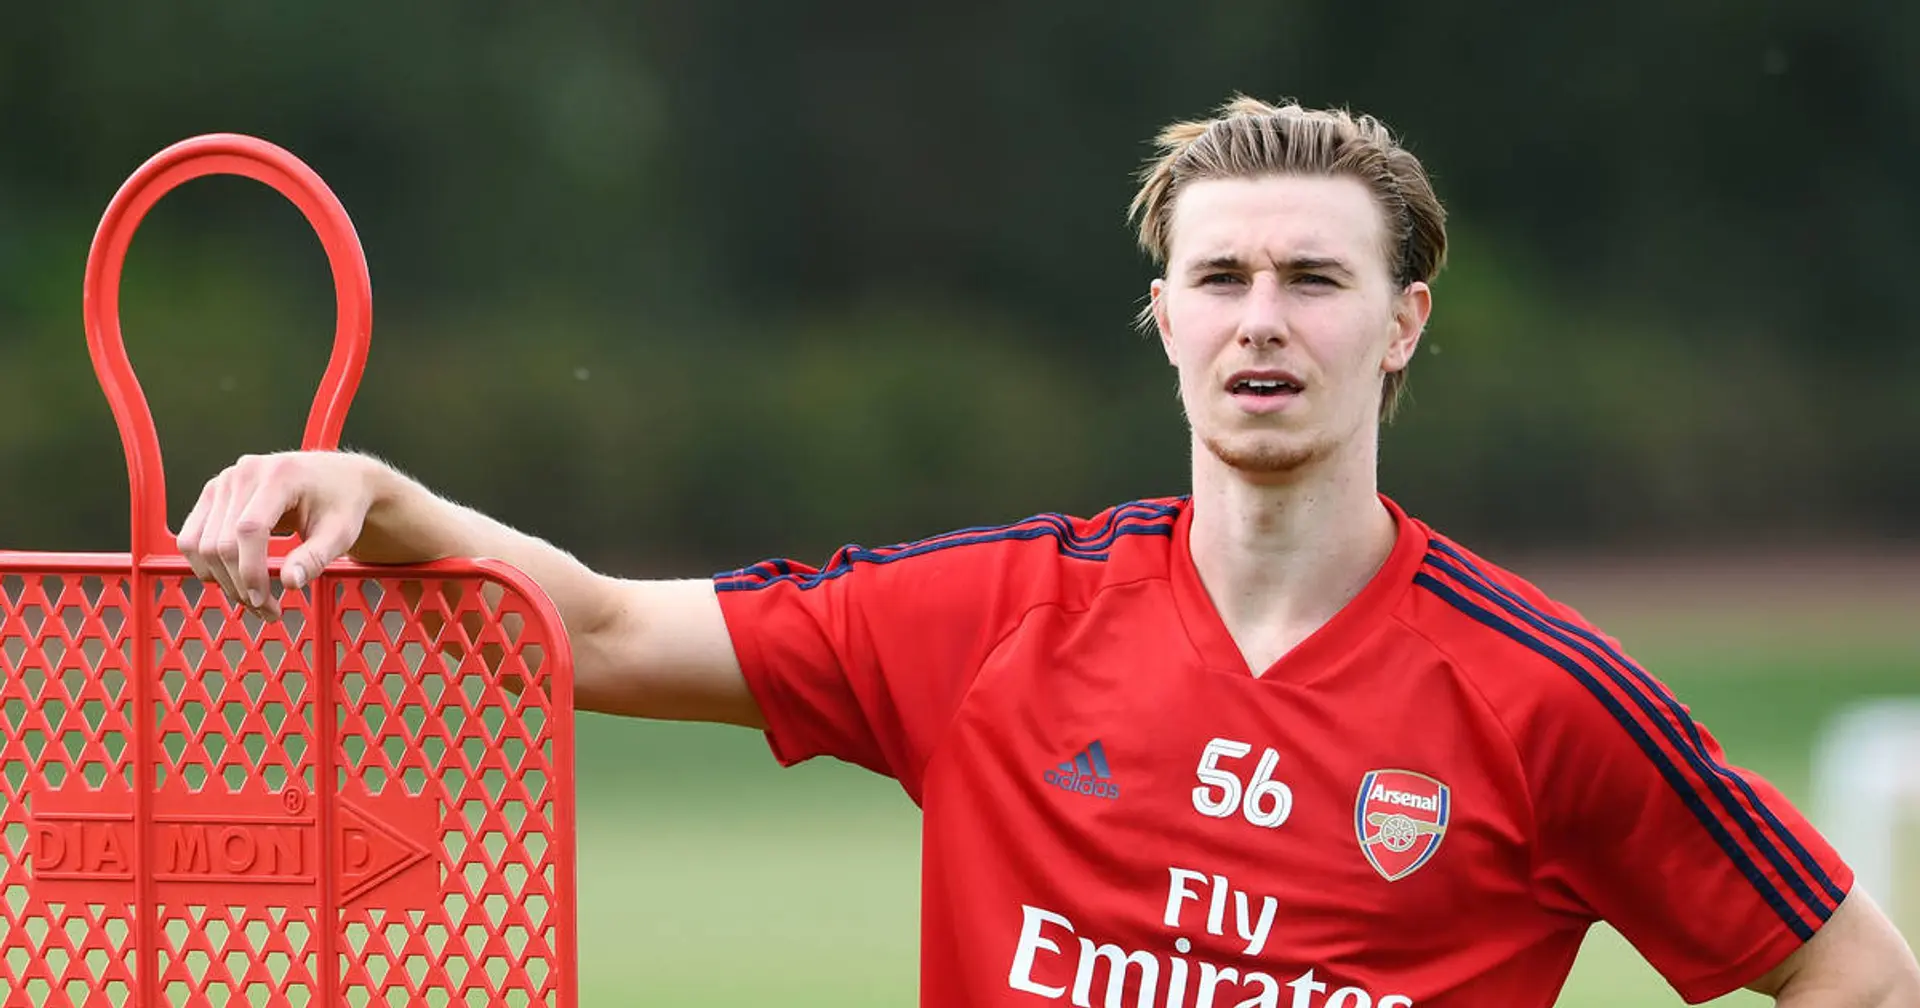 Coventry City 'hold talks' to land highly-rated Arsenal youngster Ben Sheaf